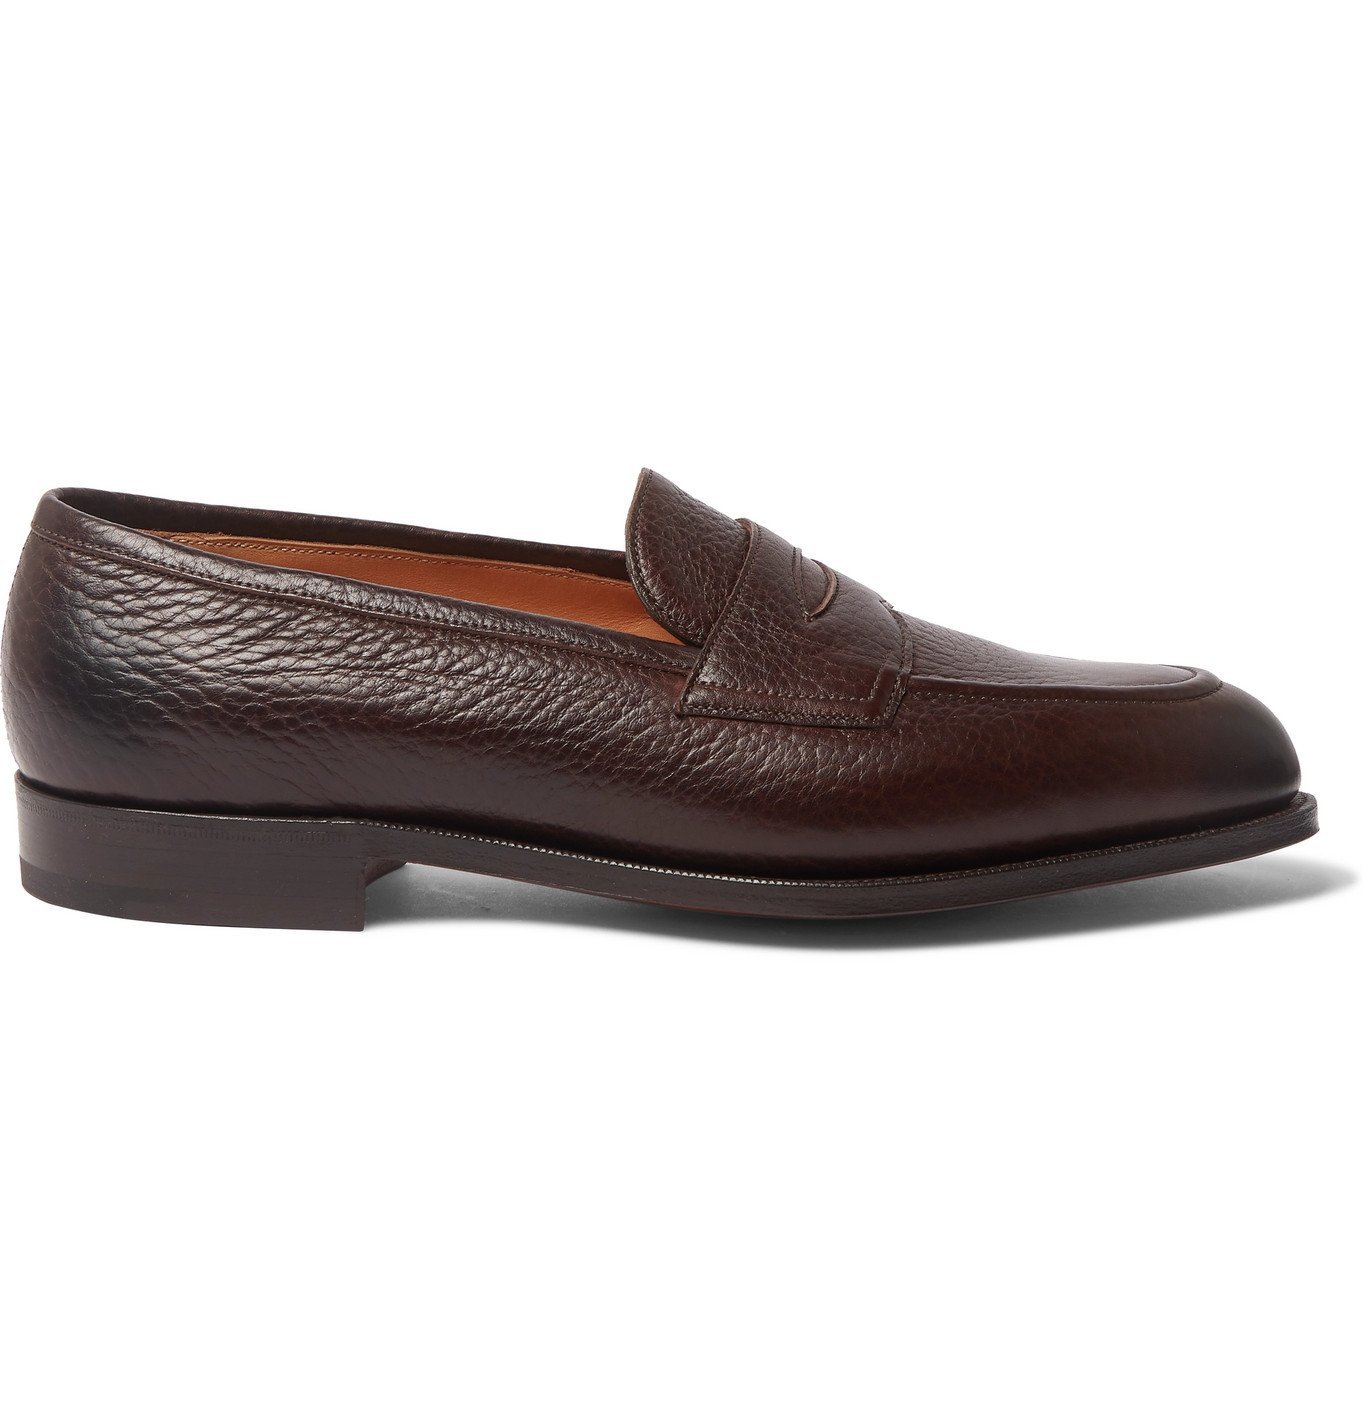 Edward Green - Piccadilly Leather-Trimmed Suede Penny Loafers - Brown ...